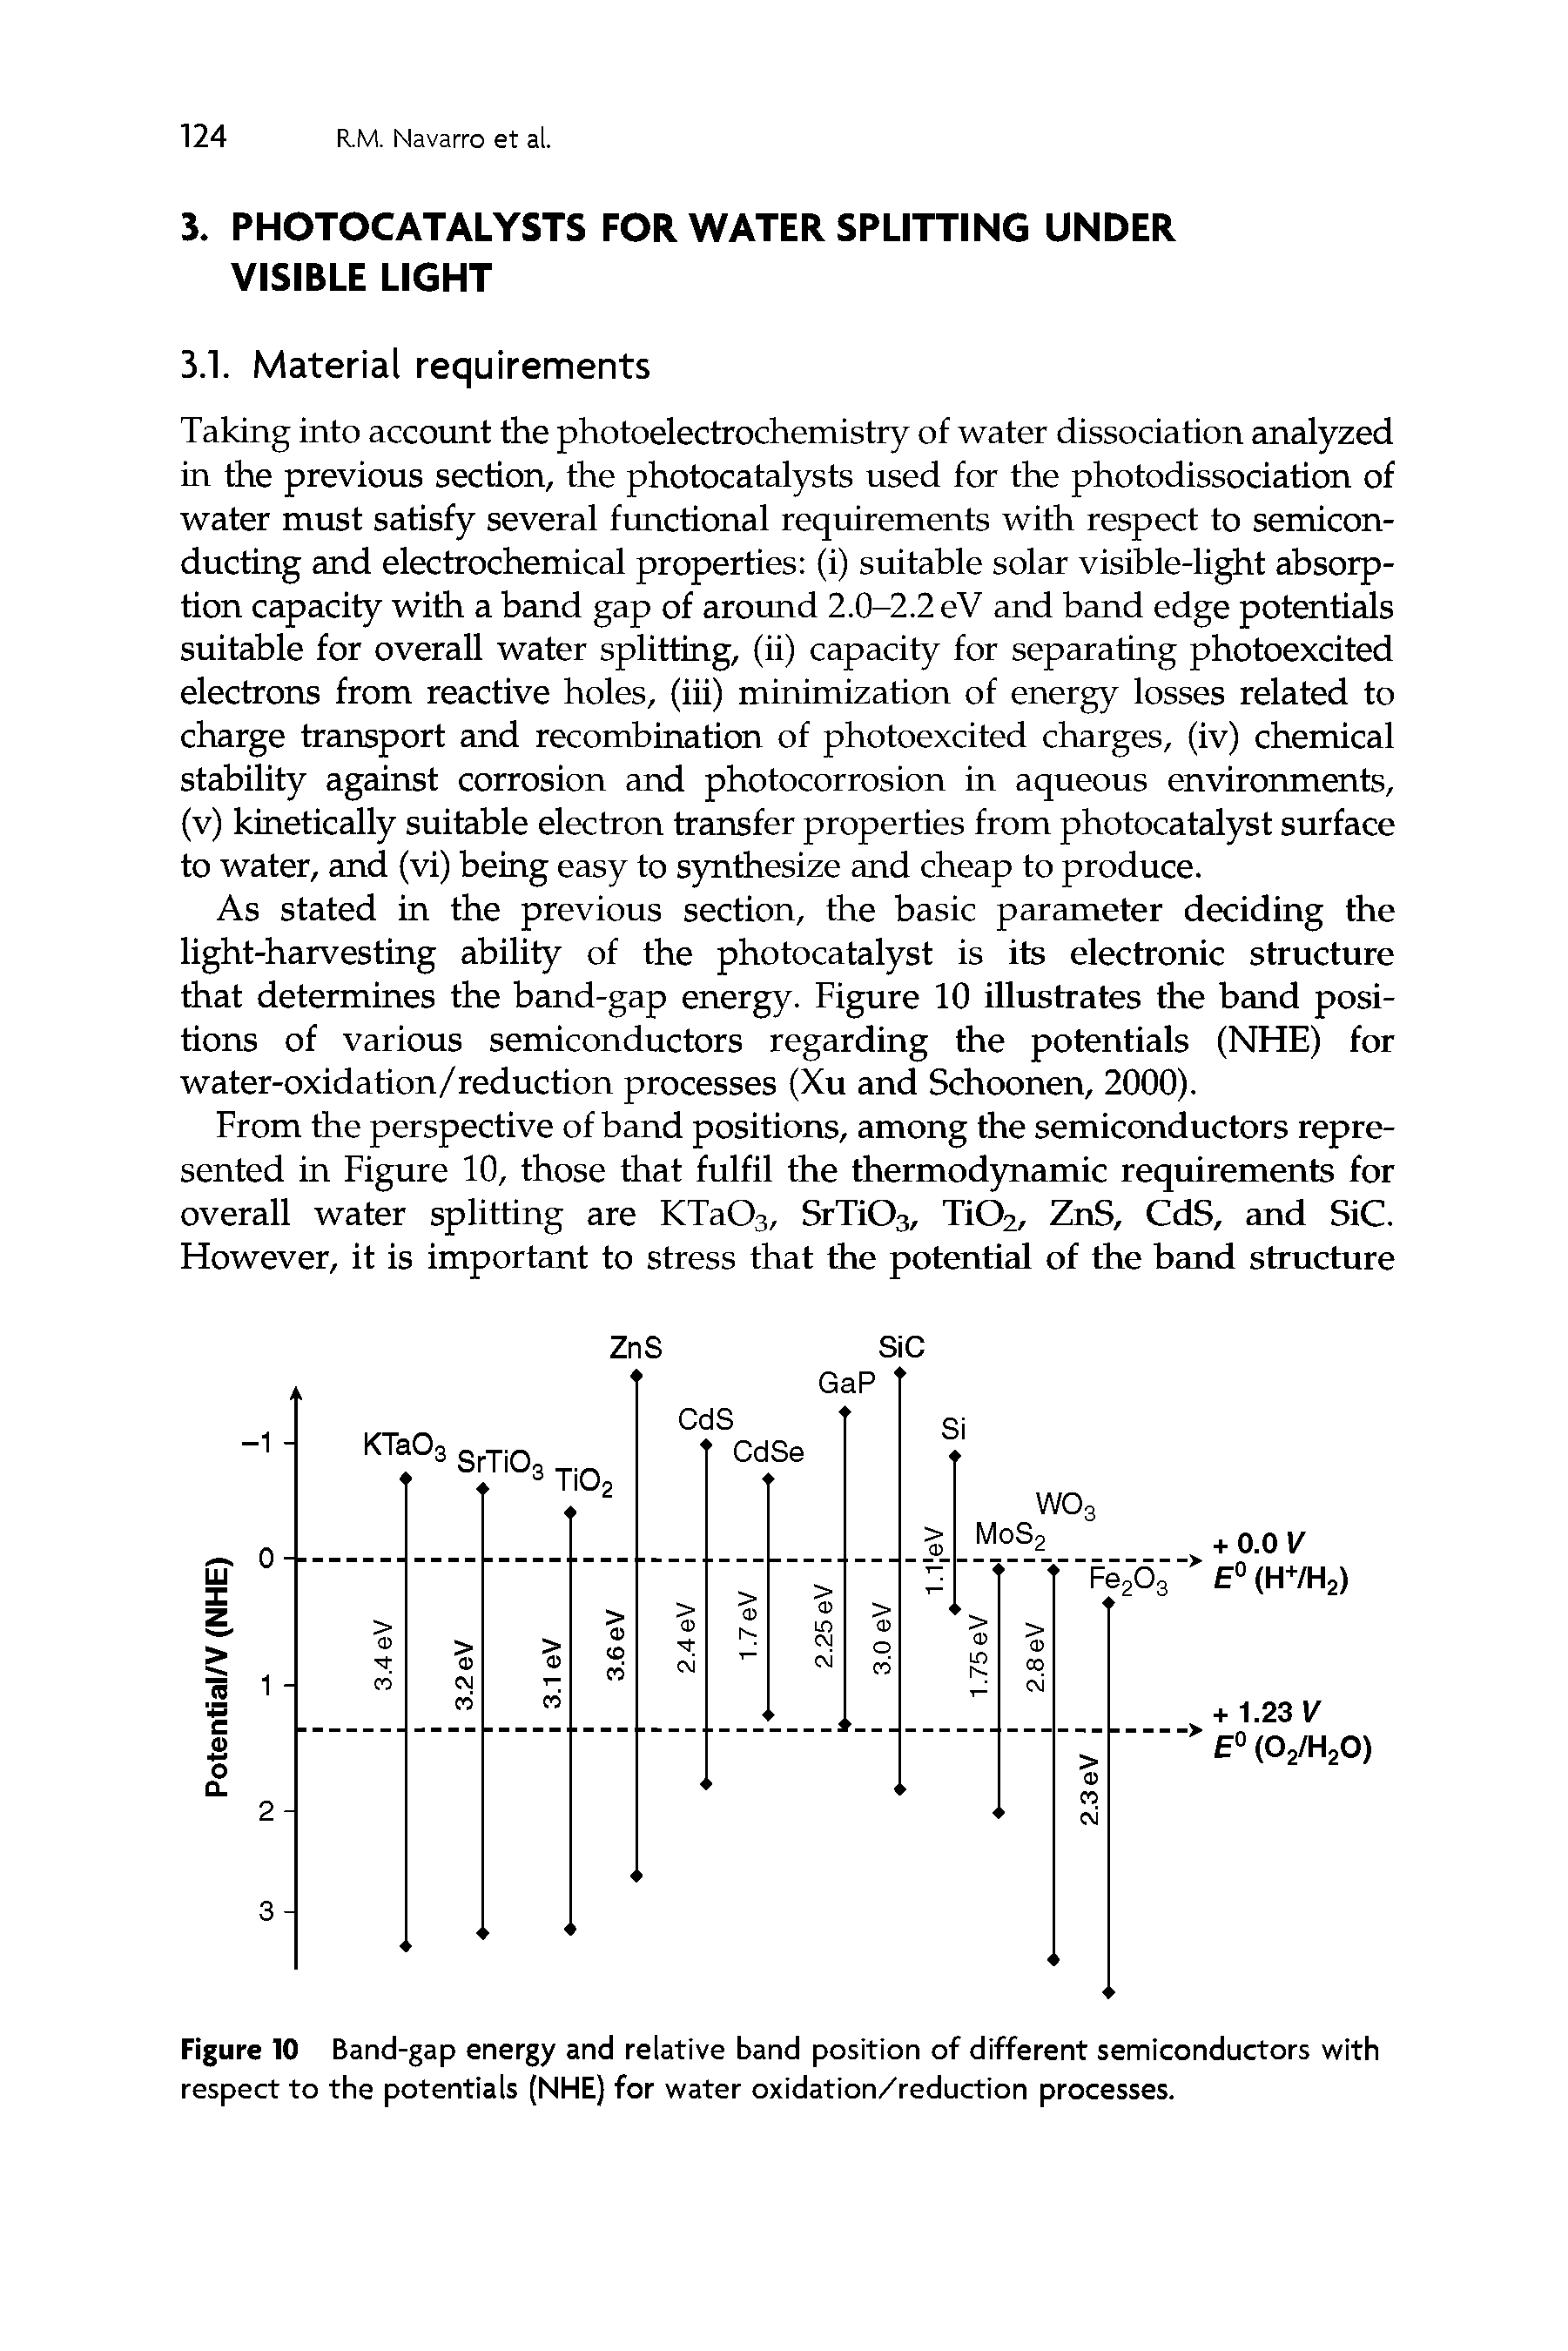 Figure 10 Band-gap energy and relative band position of different semiconductors with respect to the potentials (NHE) for water oxidation/reduction processes.